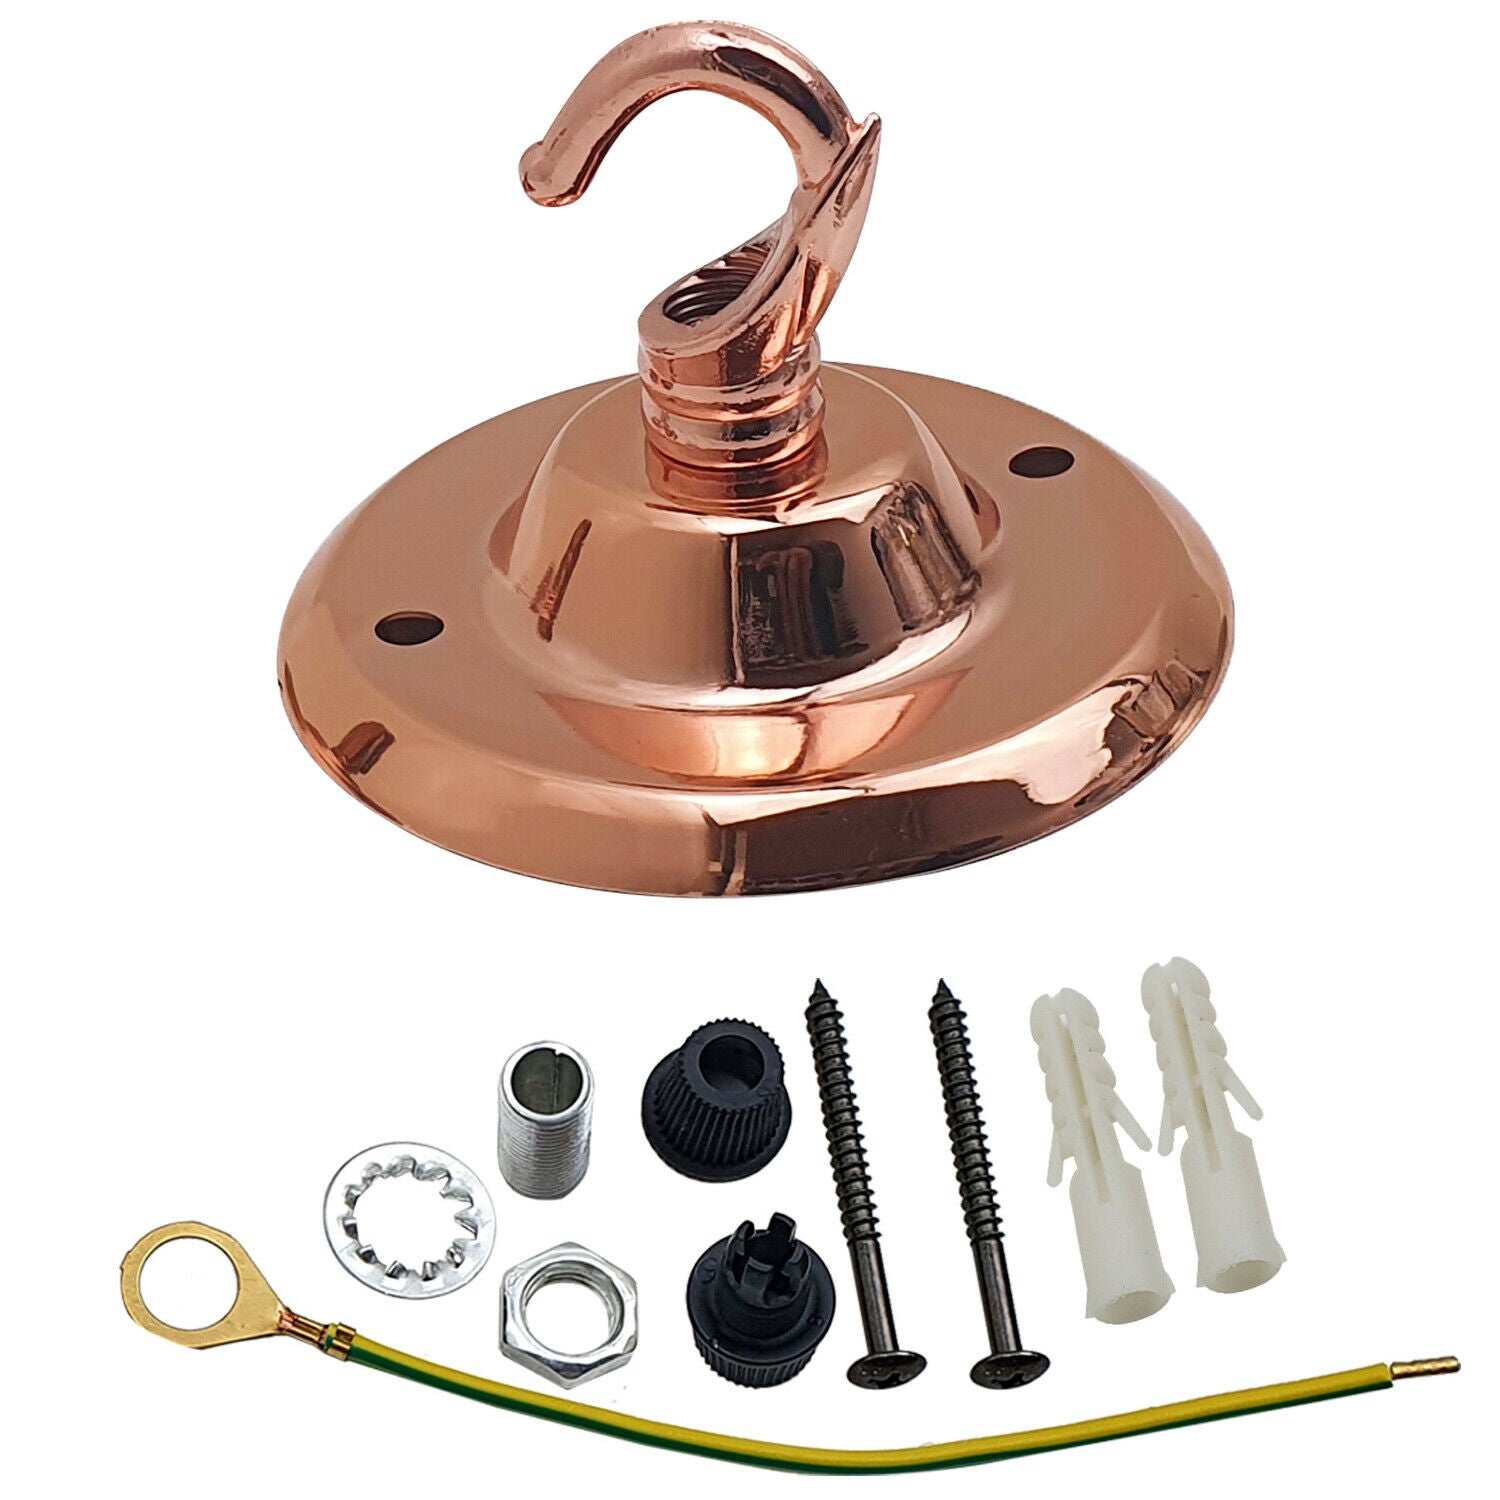 75mm Front Fitting Color Ceiling Hook With Single Point Drop Outlet Plate~1448 - LEDSone UK Ltd